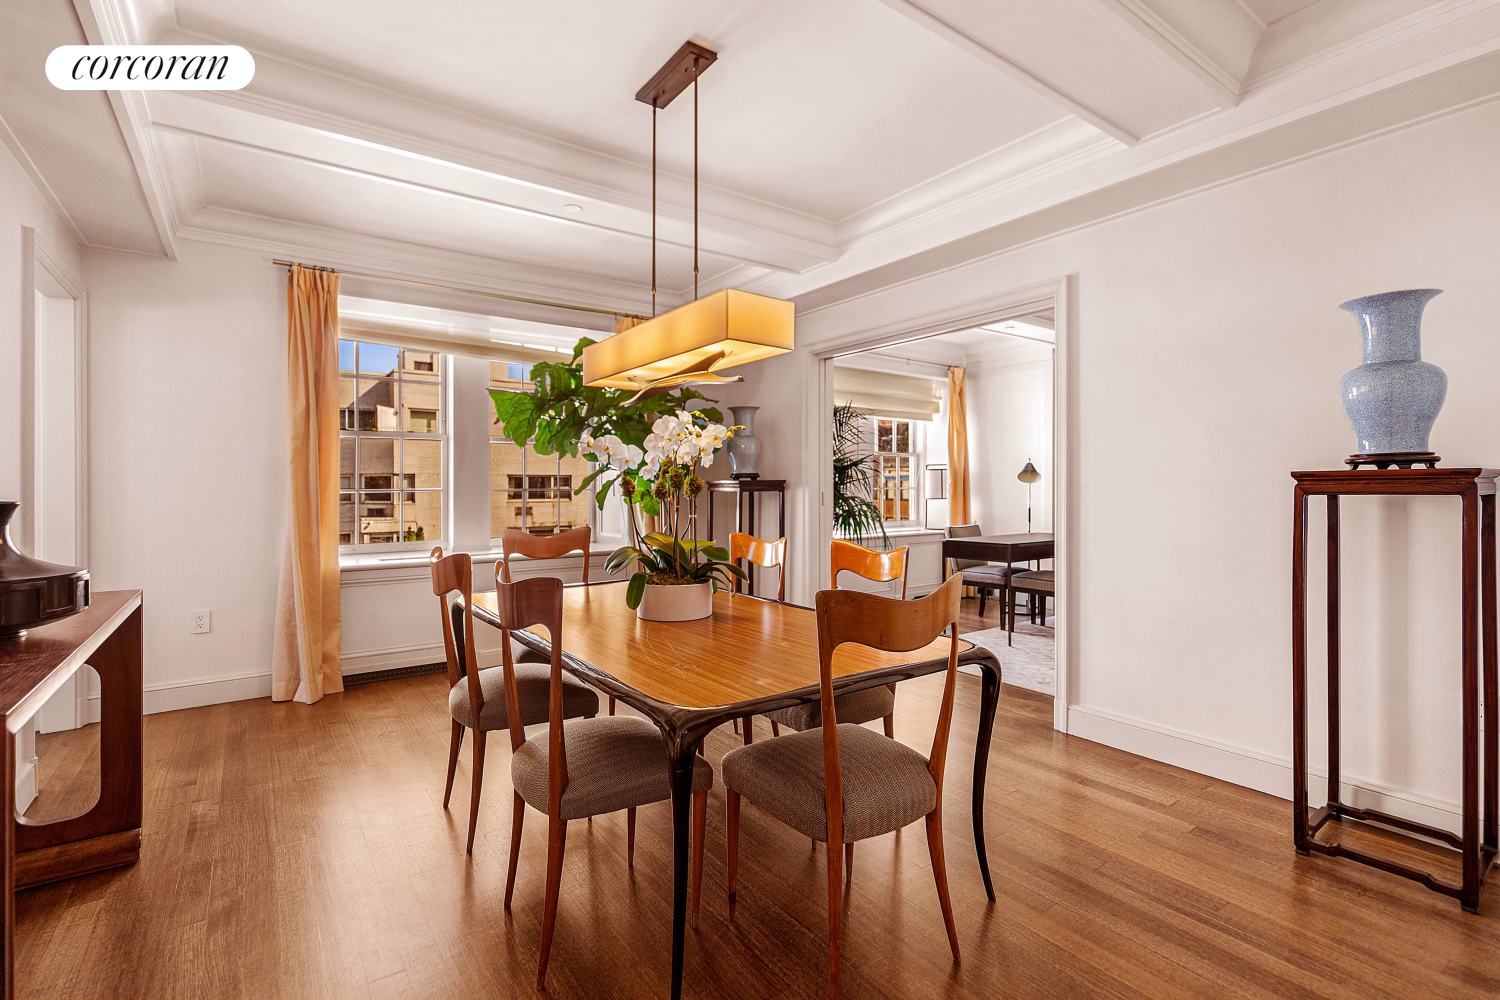 25 East 77th Street 1503, Lenox Hill, Upper East Side, NYC - 3 Bedrooms  
3.5 Bathrooms  
7 Rooms - 